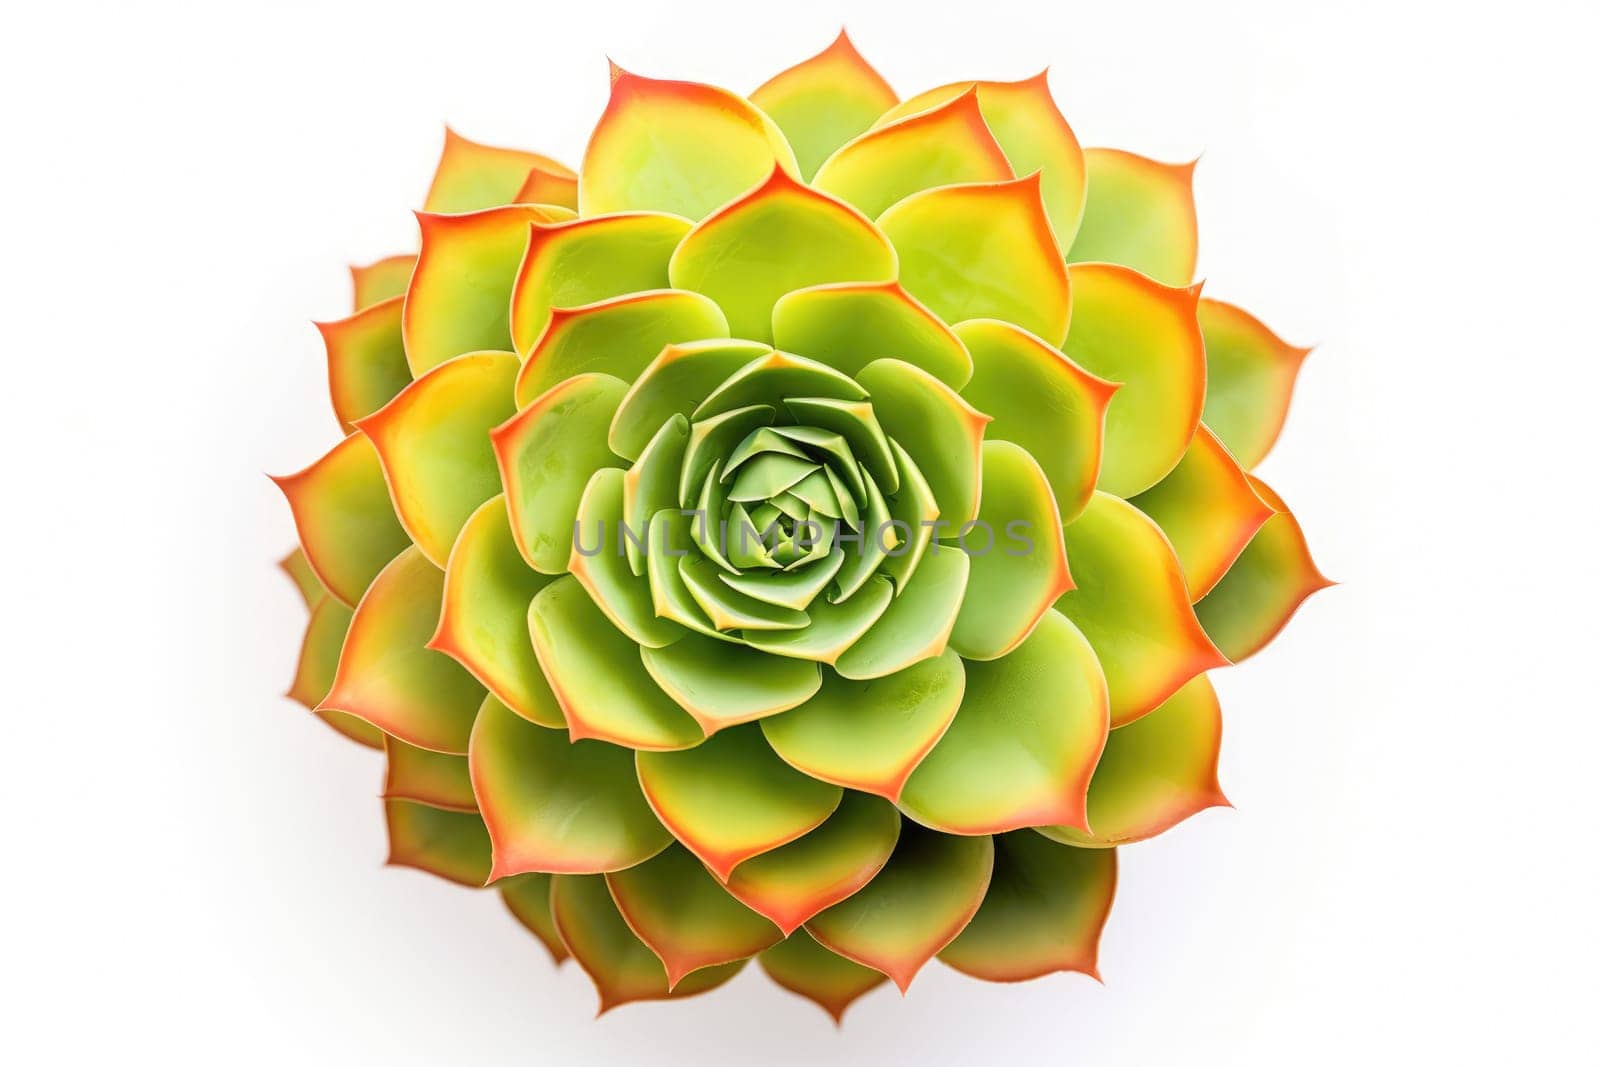 Succulent Echeveria agavoides pot plant isolated on white background. by Ramanouskaya